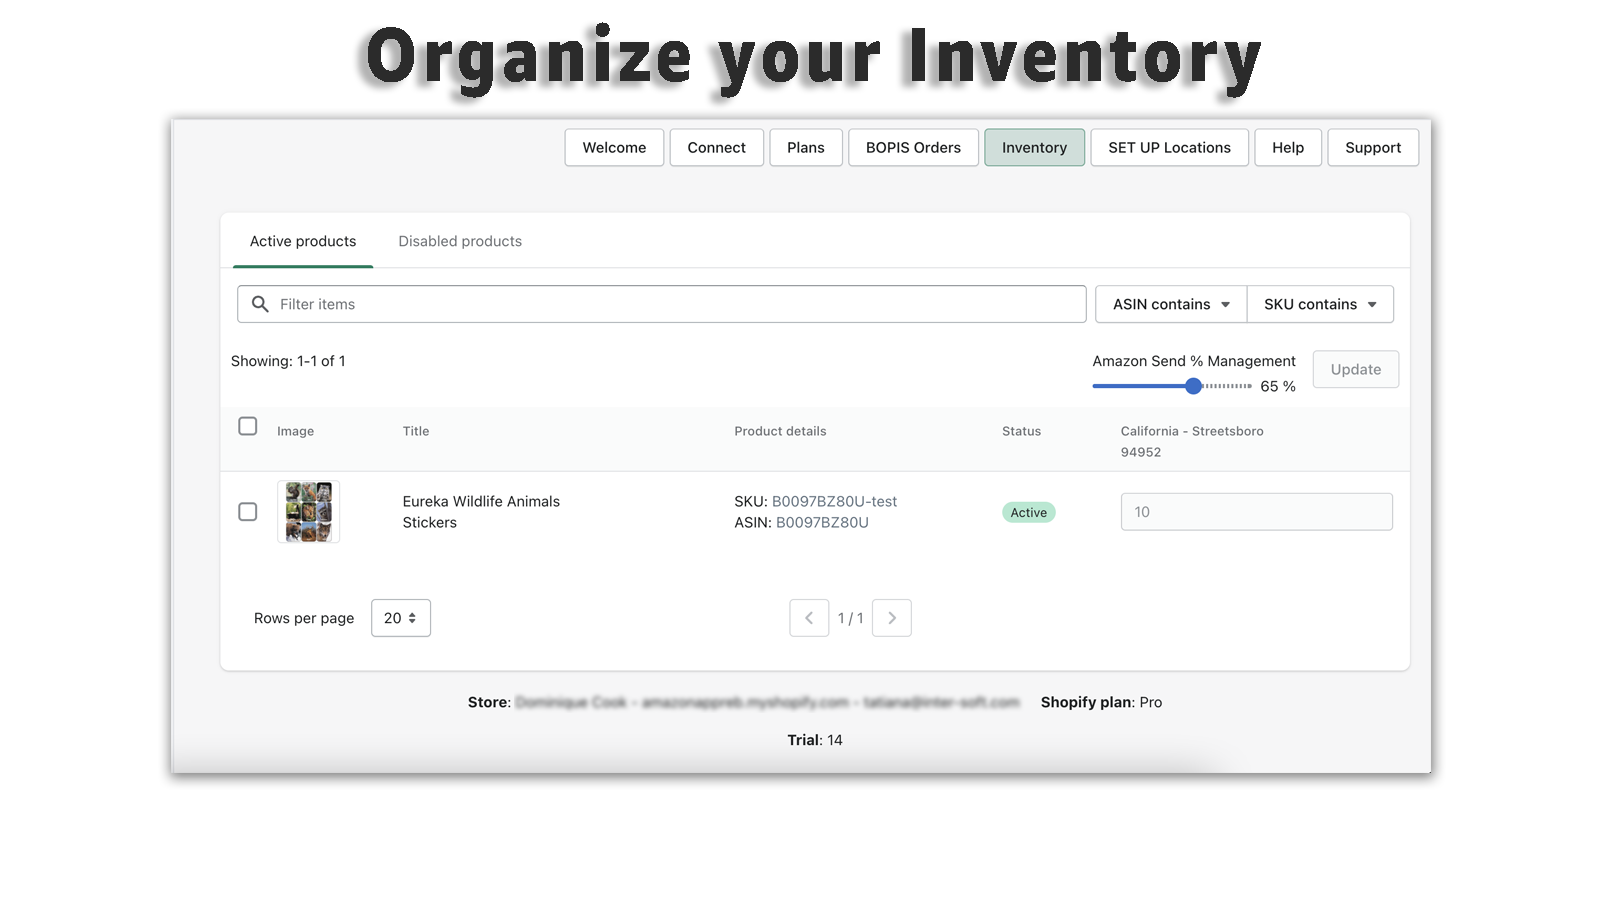 Organize your inventory